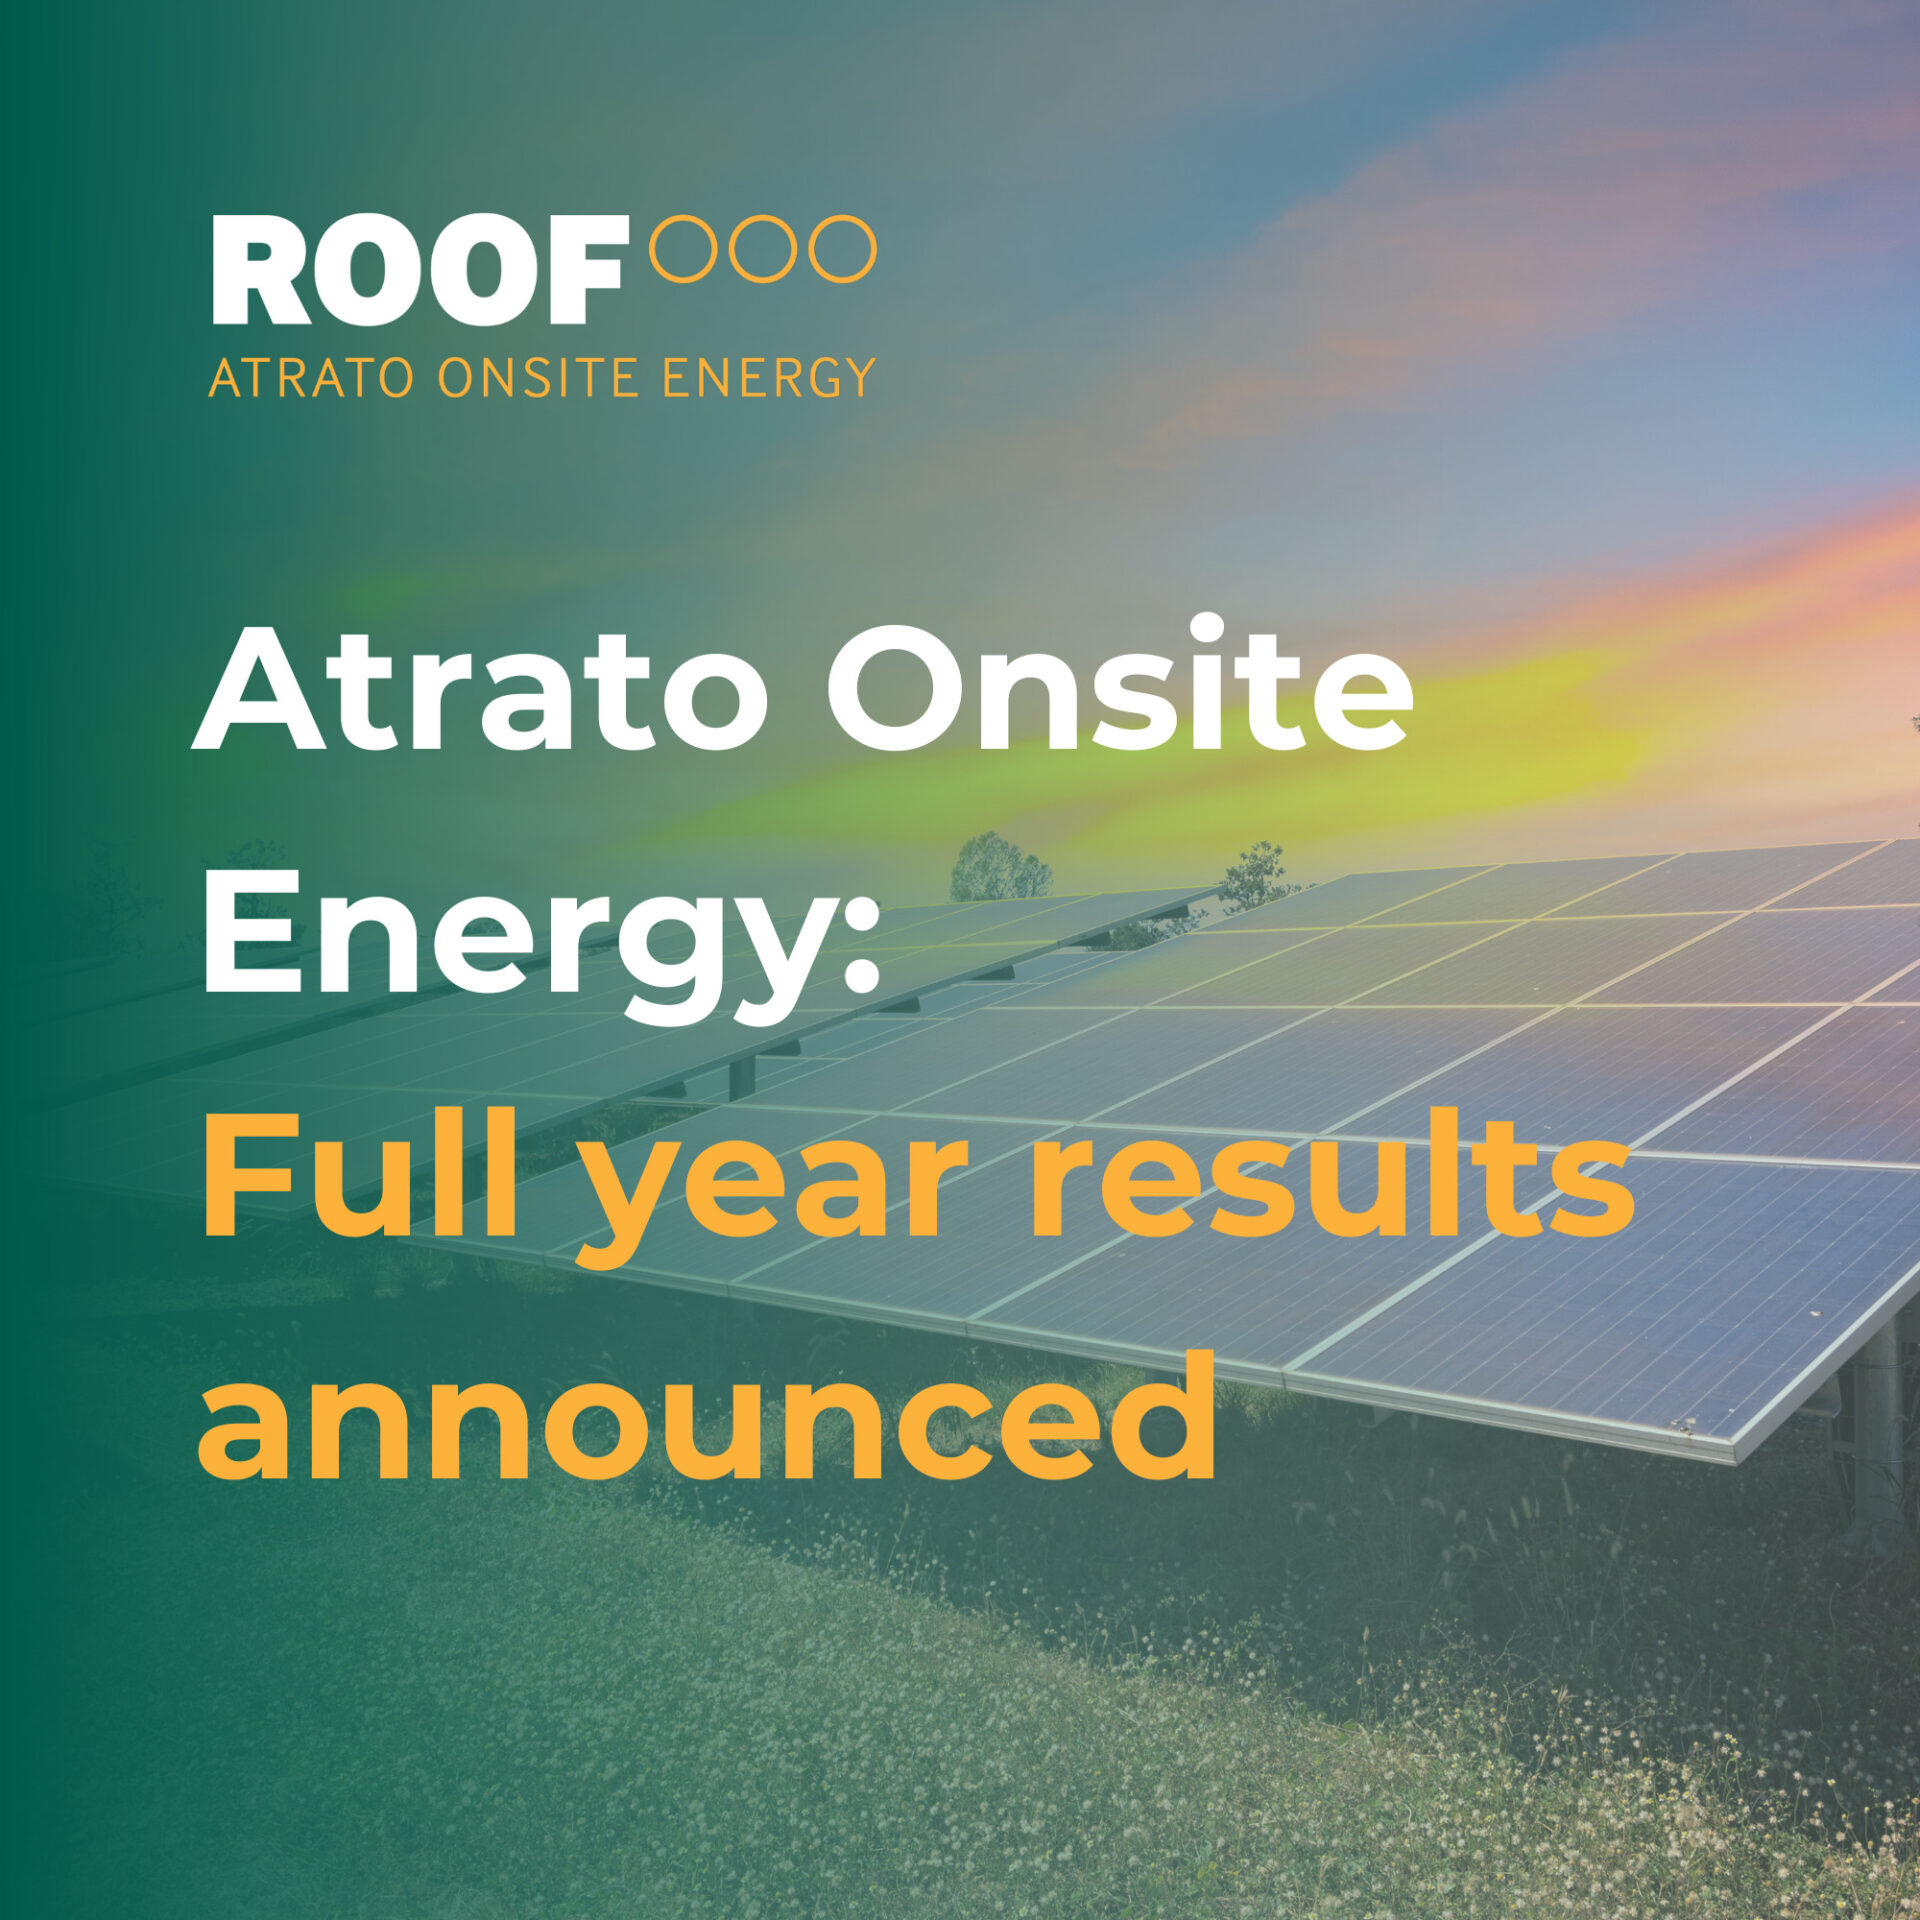 Atrato Onsite Energy Full Year Results